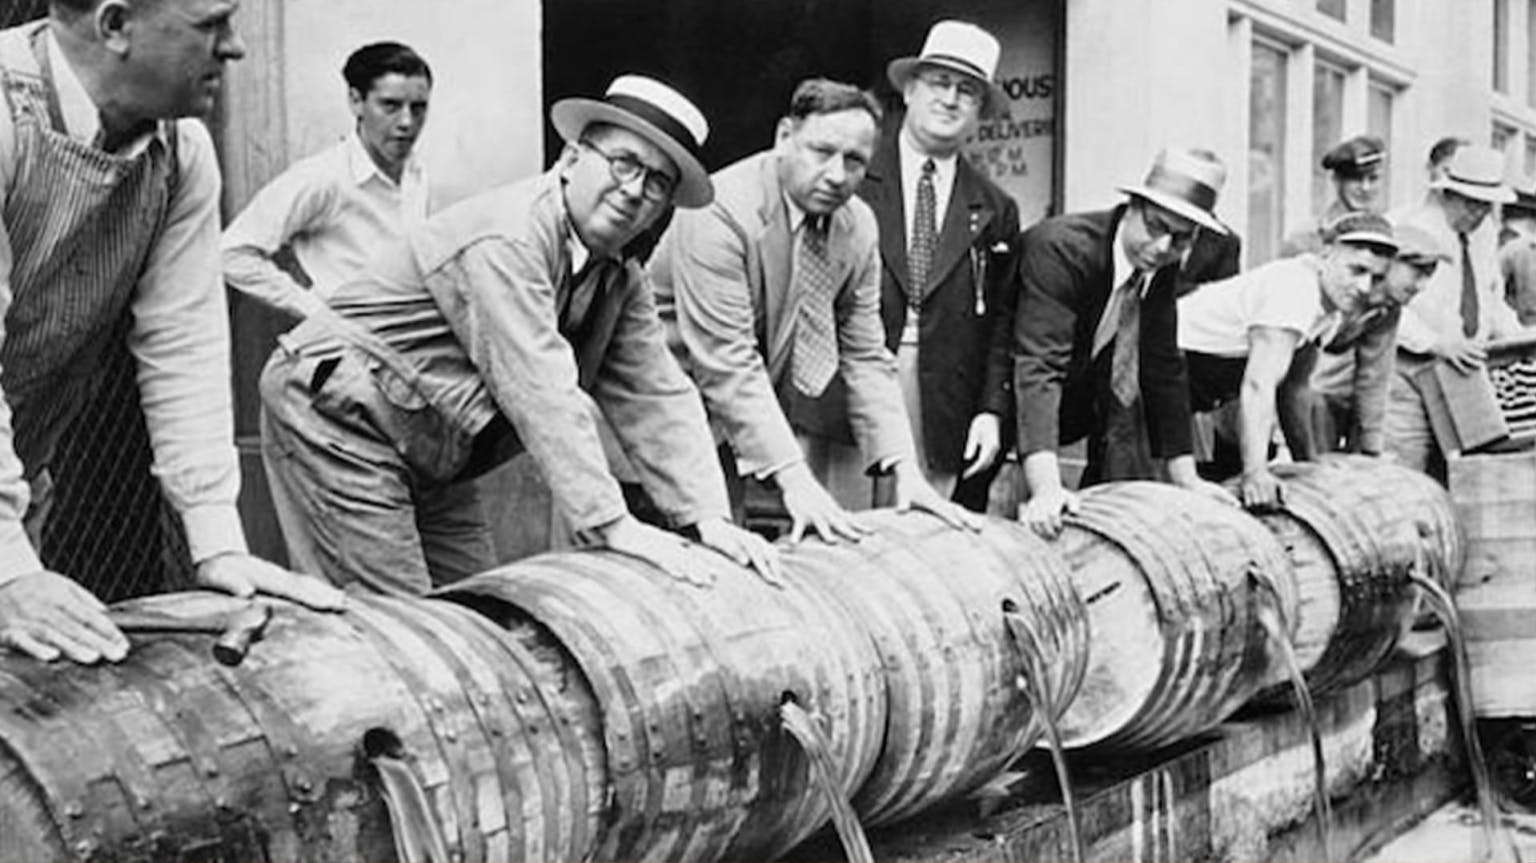 A year in wine: 1934